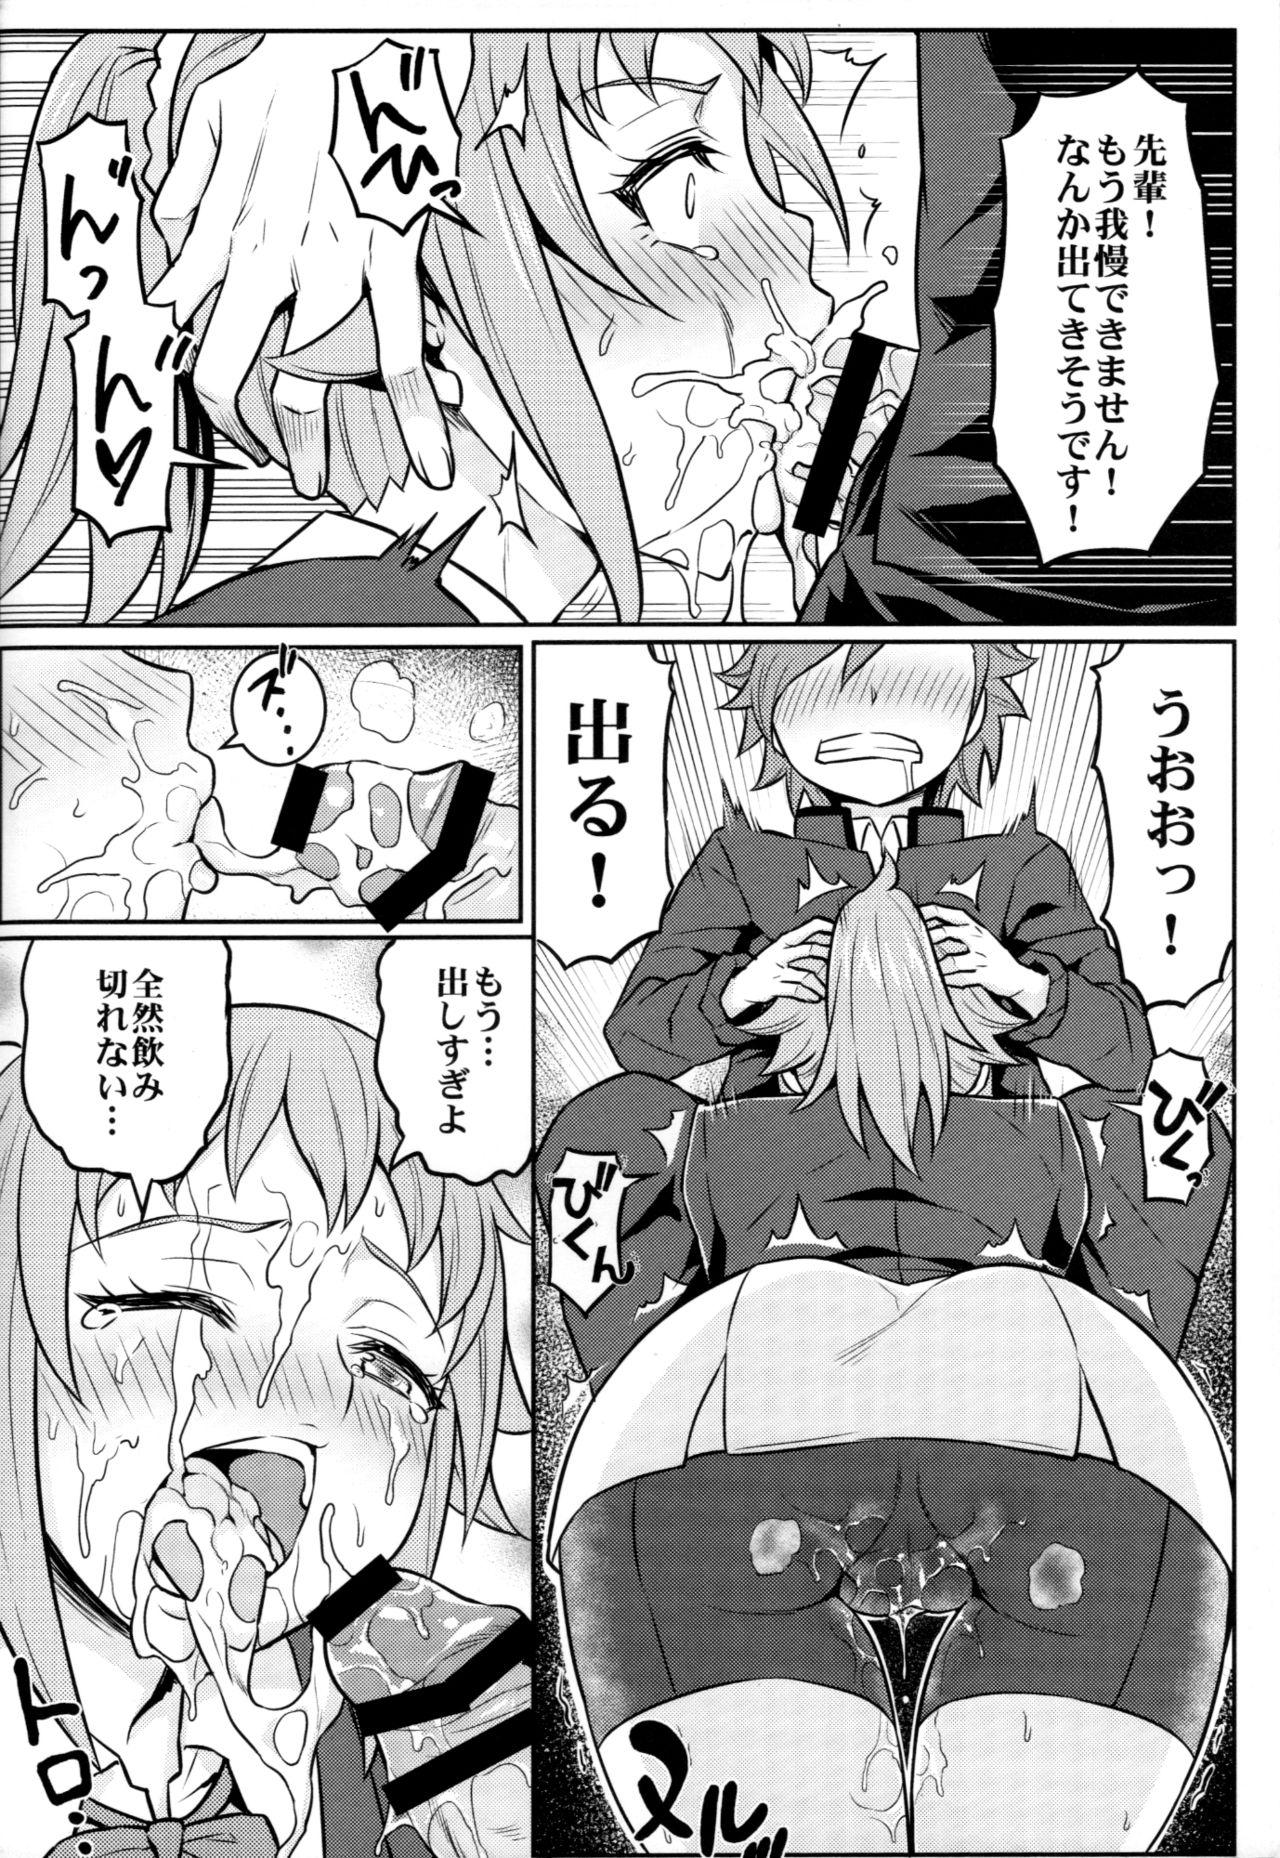 Chicks Nayamashii Fighters - Gundam build fighters try Natural Boobs - Page 9